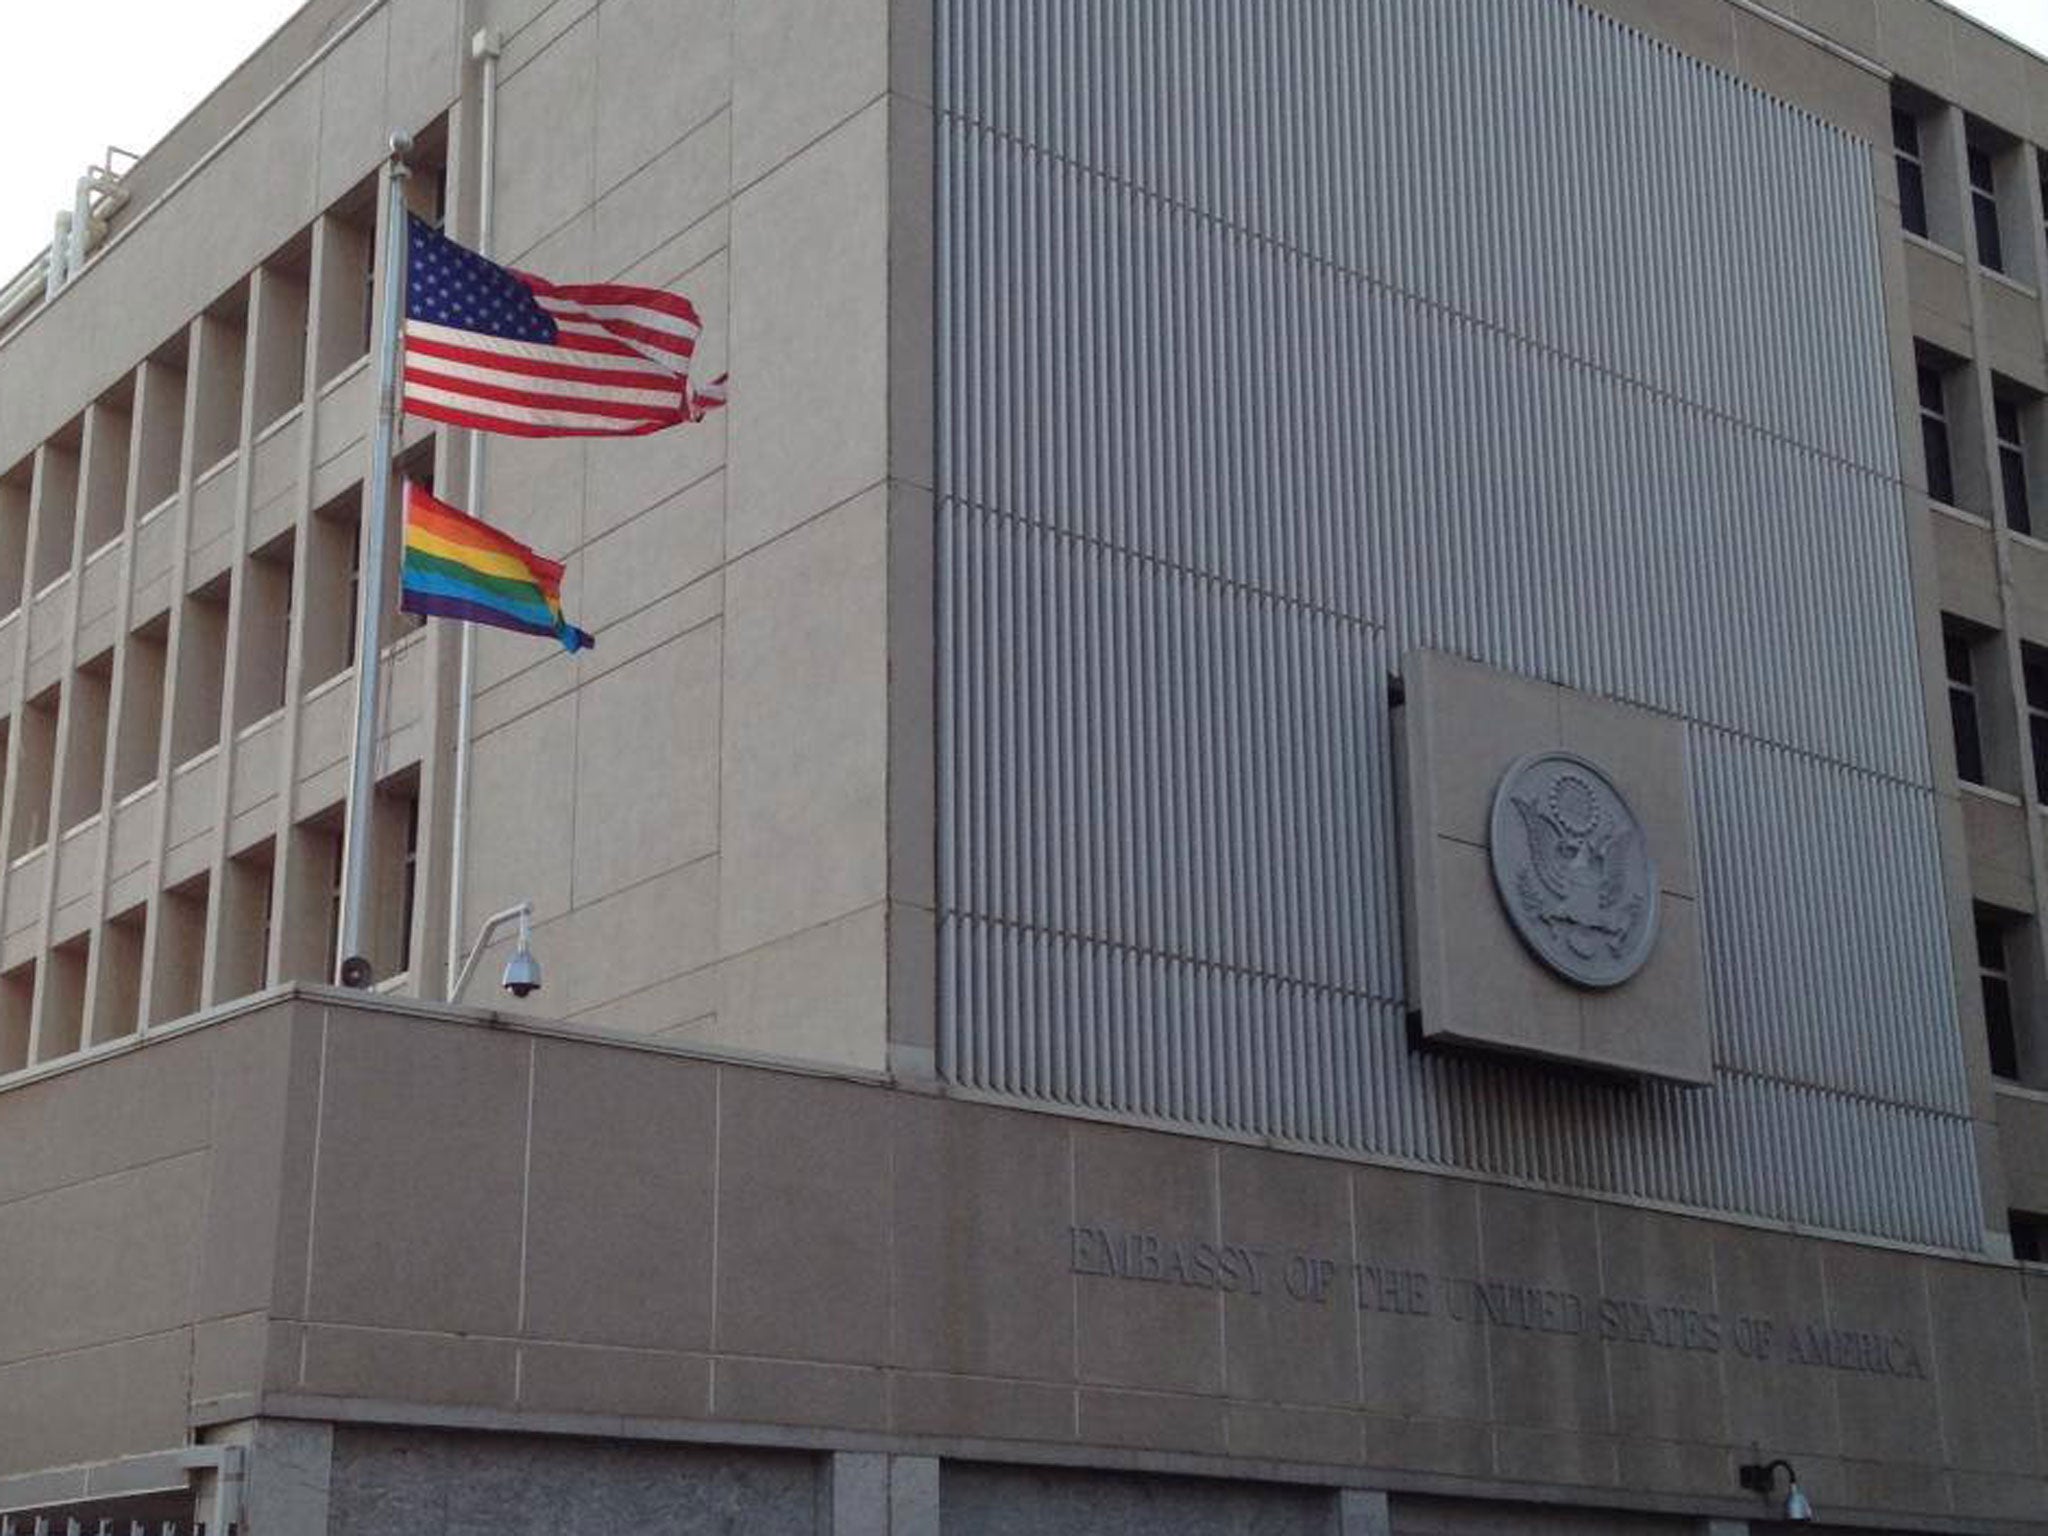 The US embassy in Tel Aviv faced a backlash of criticism after it raised the rainbow flag next to the American flag above its office for the first time in history earlier this week.